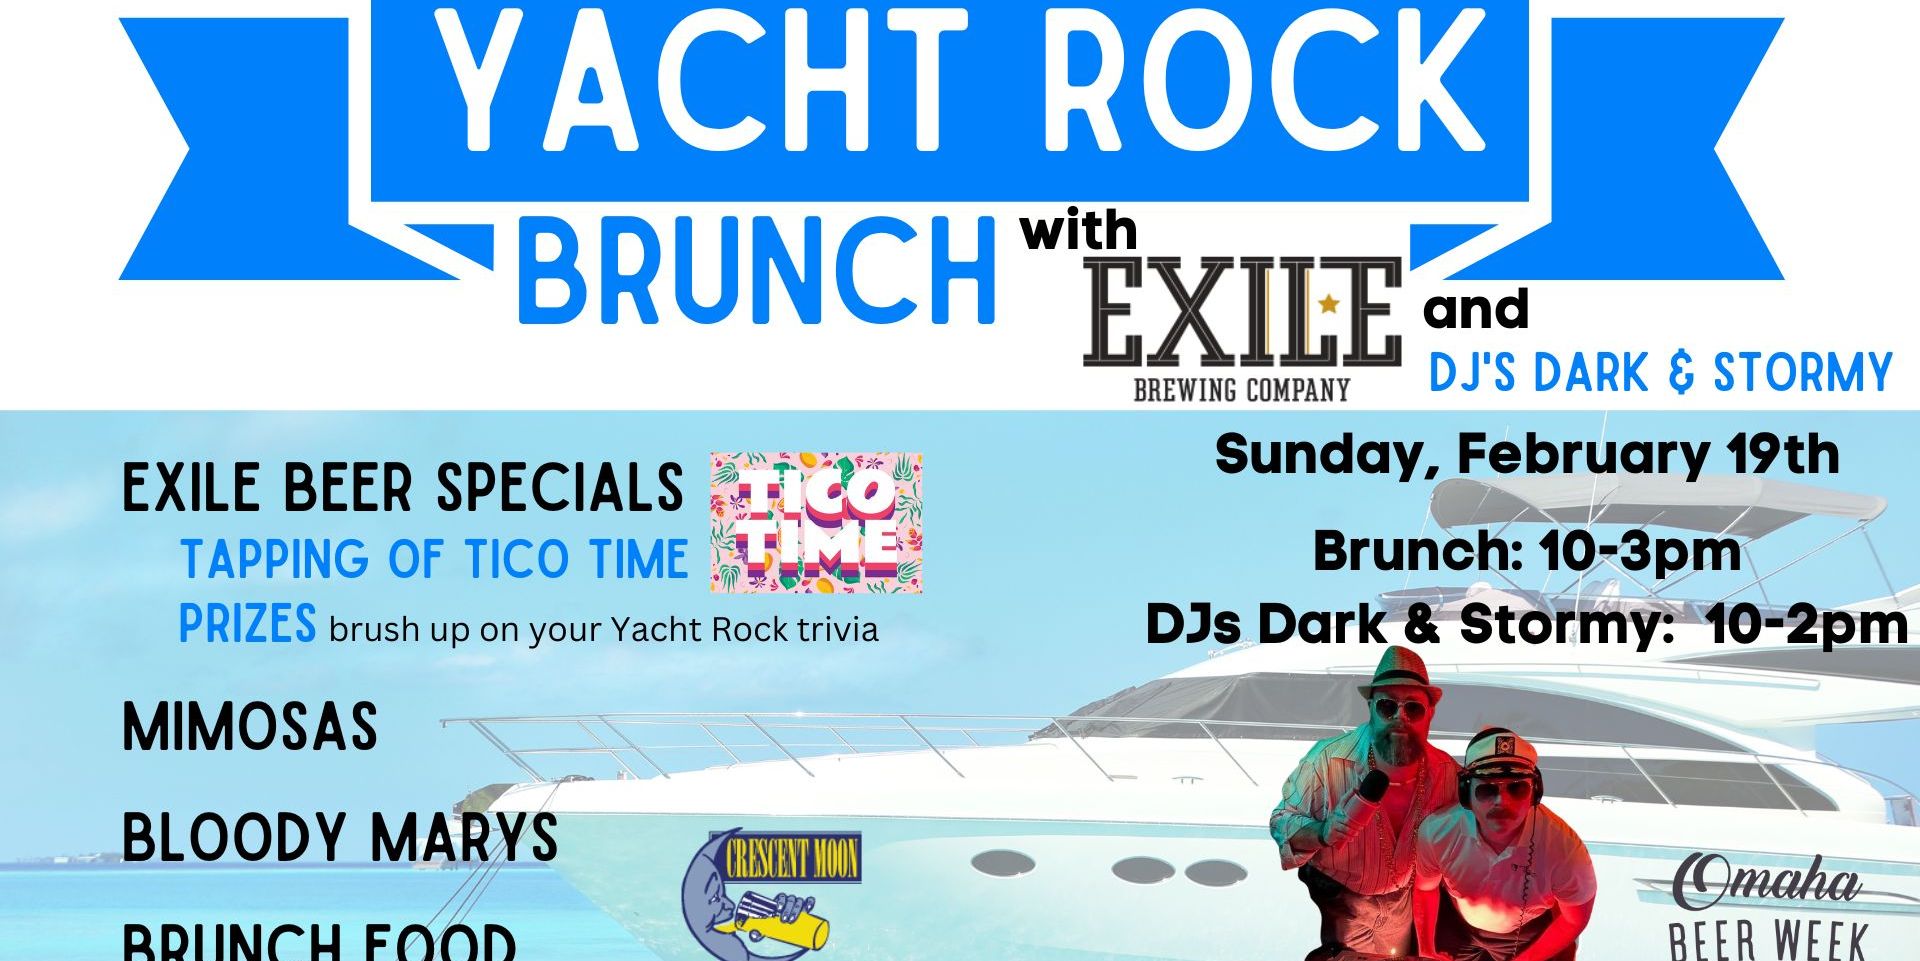 Yacht Rock Brunch with DJs Dark & Stormy & Exile Brewing Co. promotional image